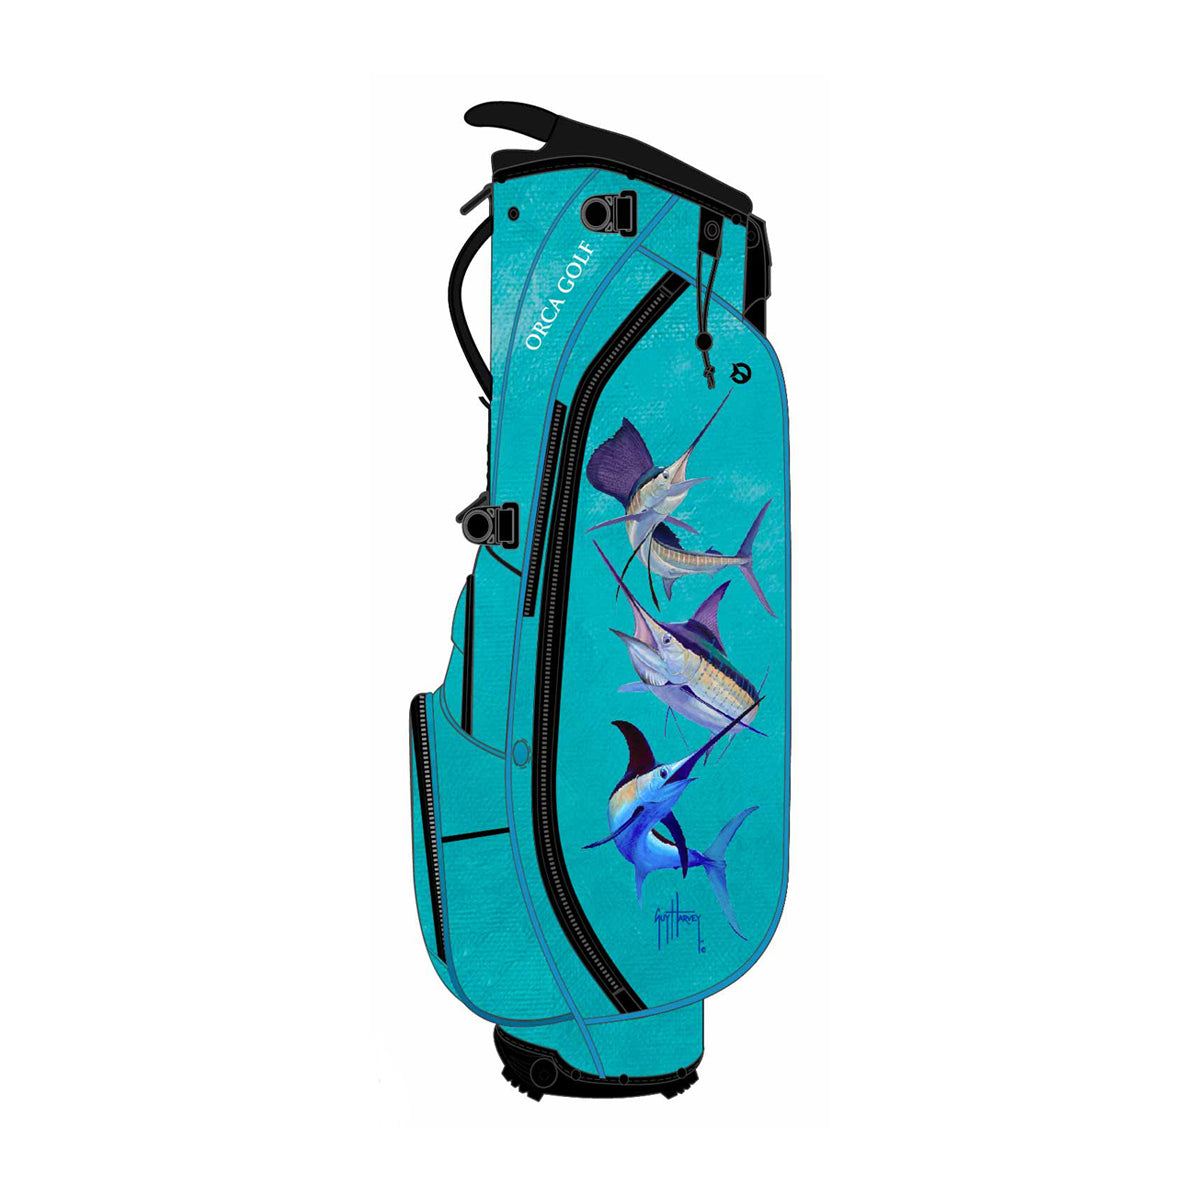 Offshore Collage Dorsal One Golf Bag